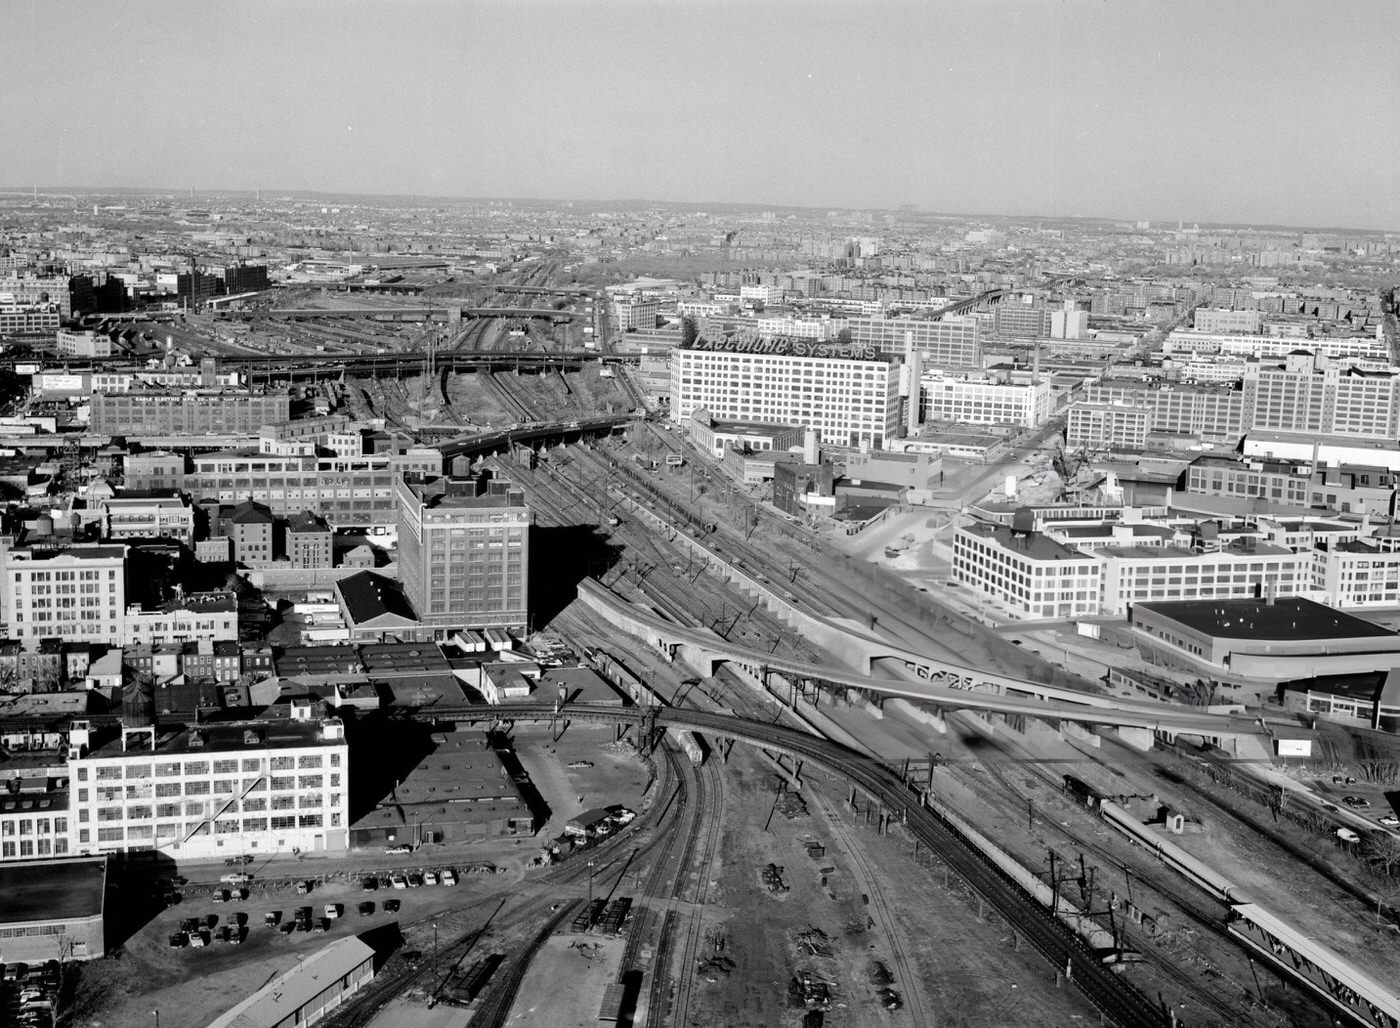 The Sunnyside Yards In Long Island City, Queens, 1977.